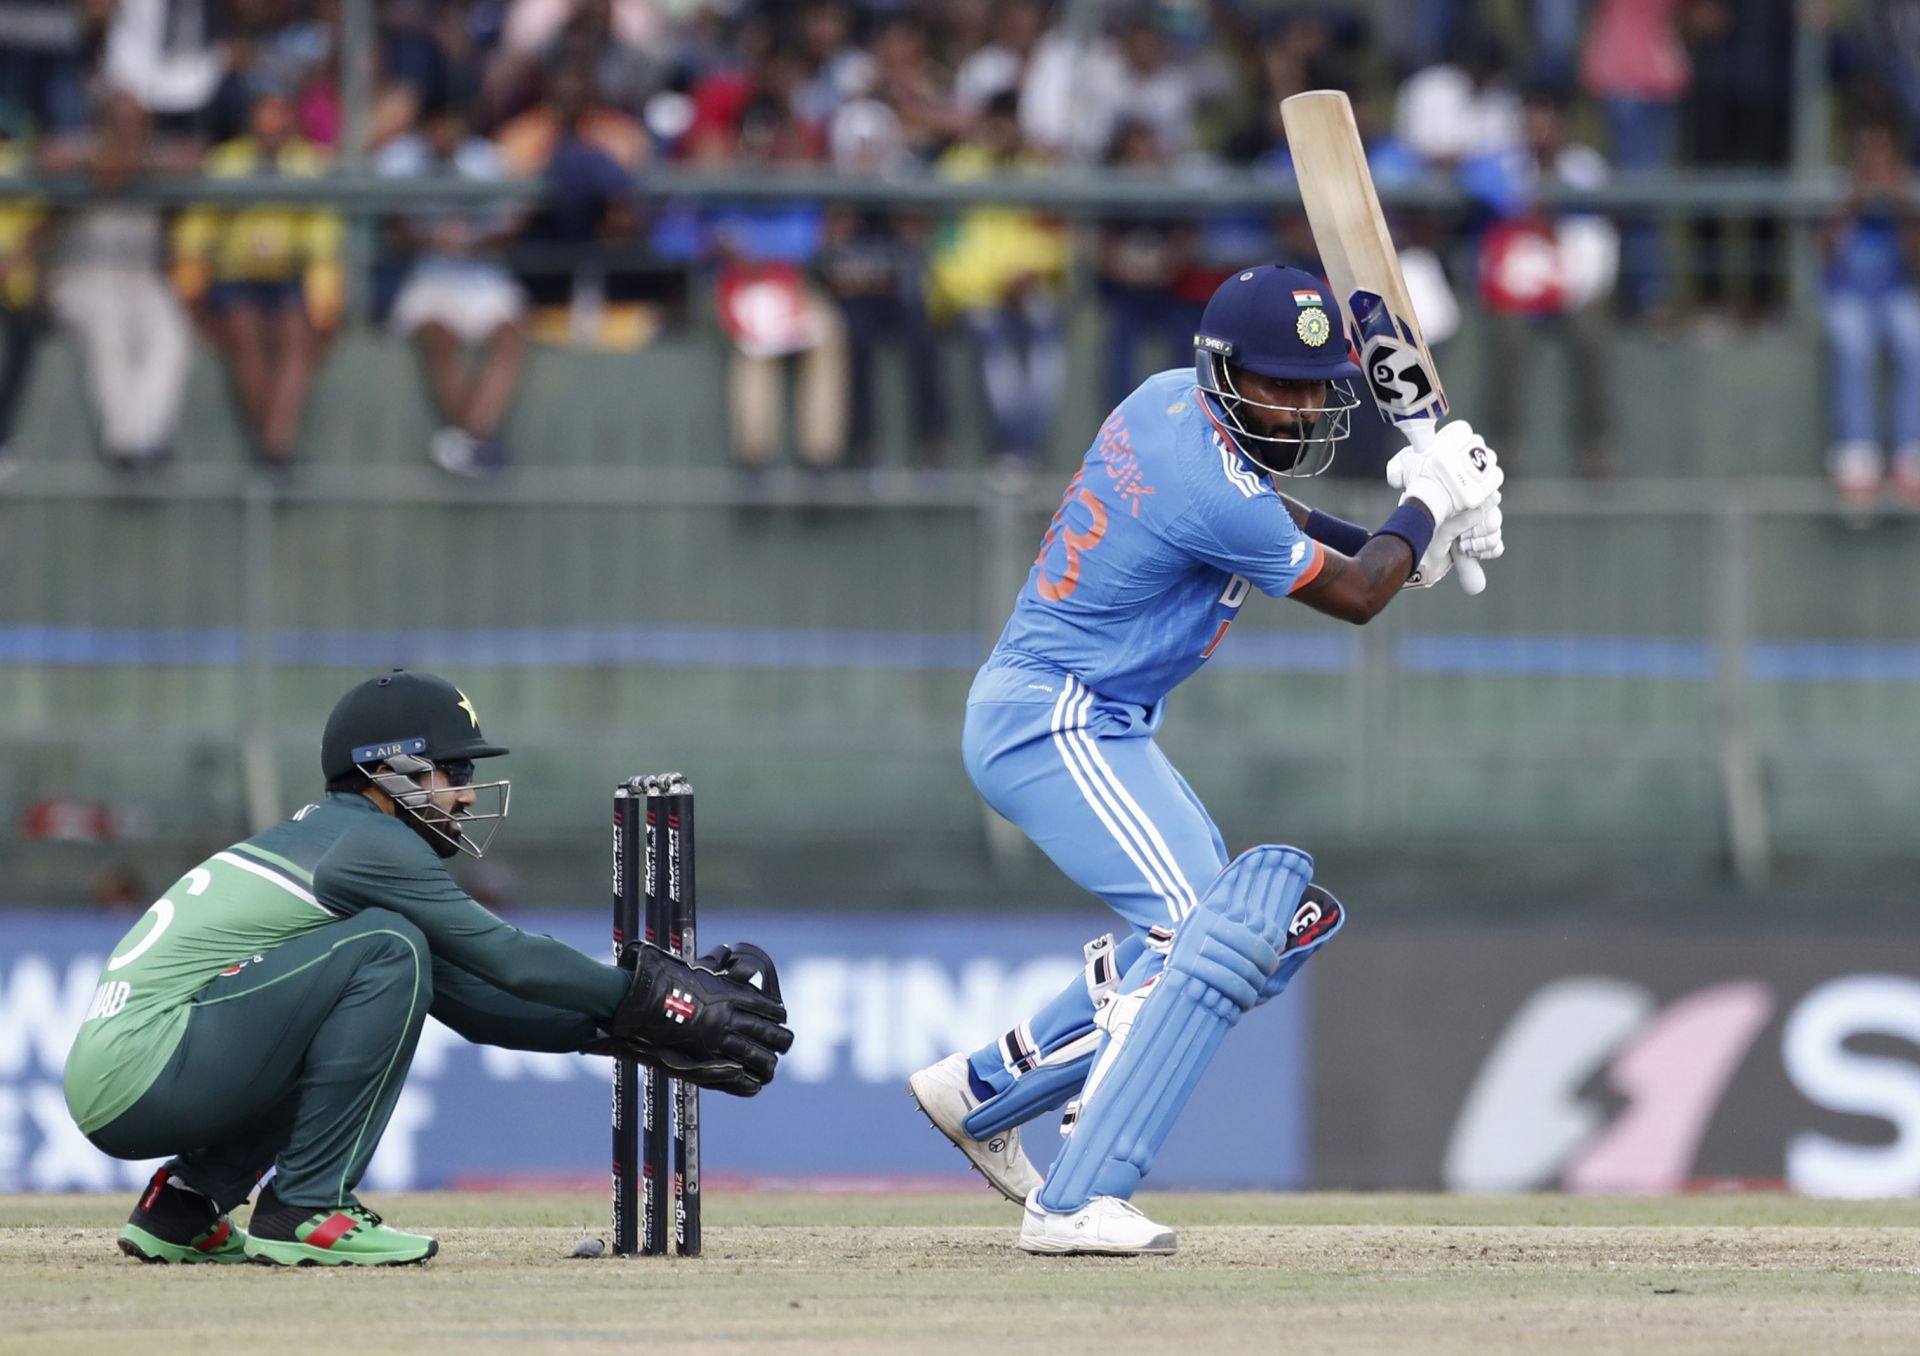 Hardik Pandya struck seven fours and a six during his innings. [P/C: AP]